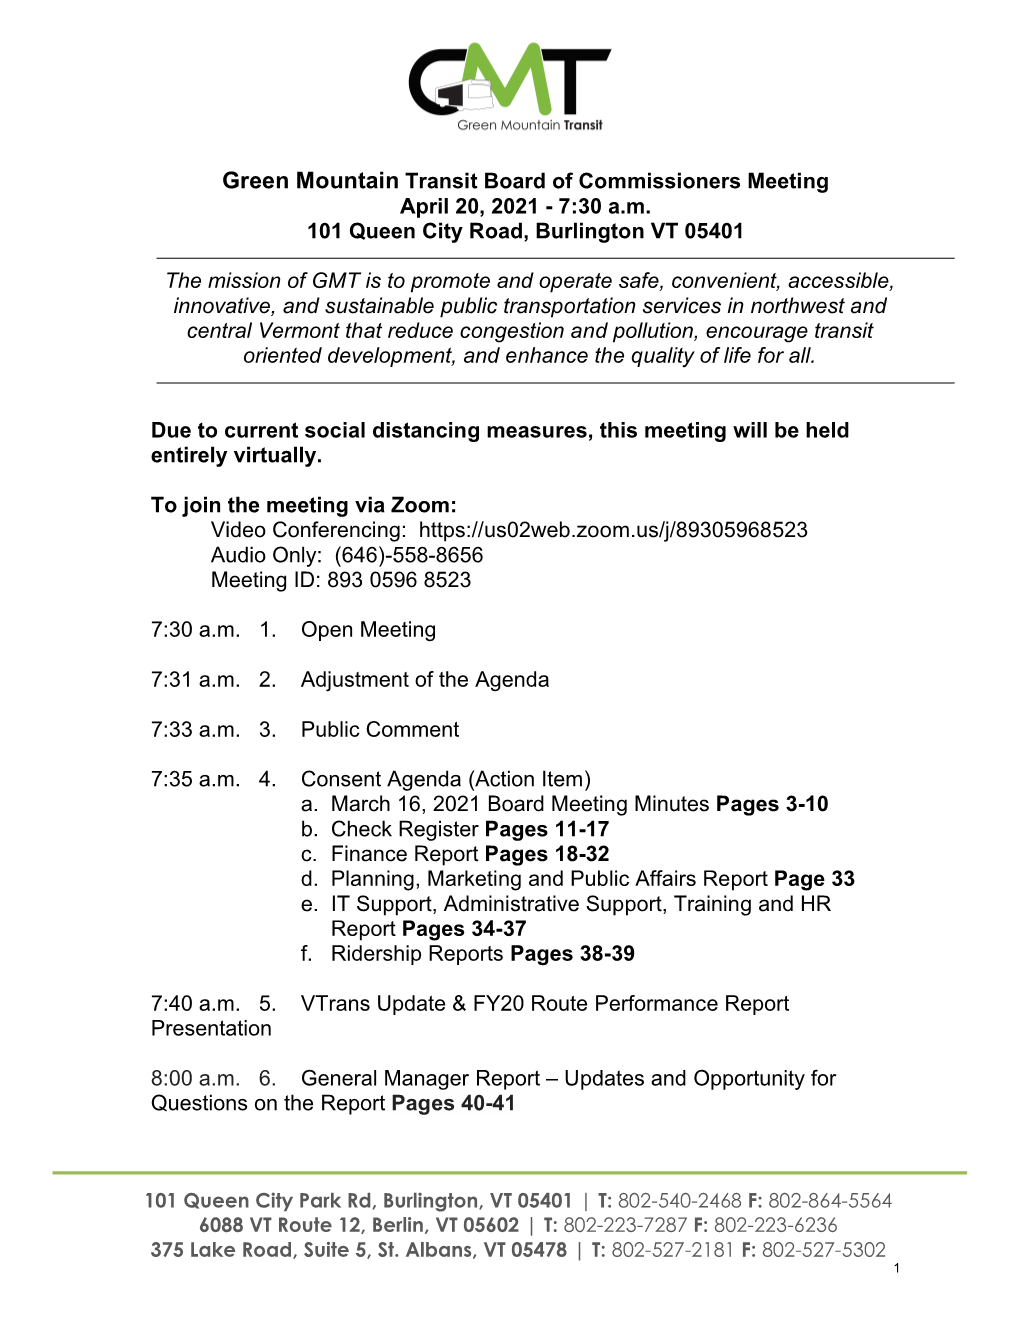 Green Mountain Transit Board of Commissioners Meeting April 20, 2021 - 7:30 A.M